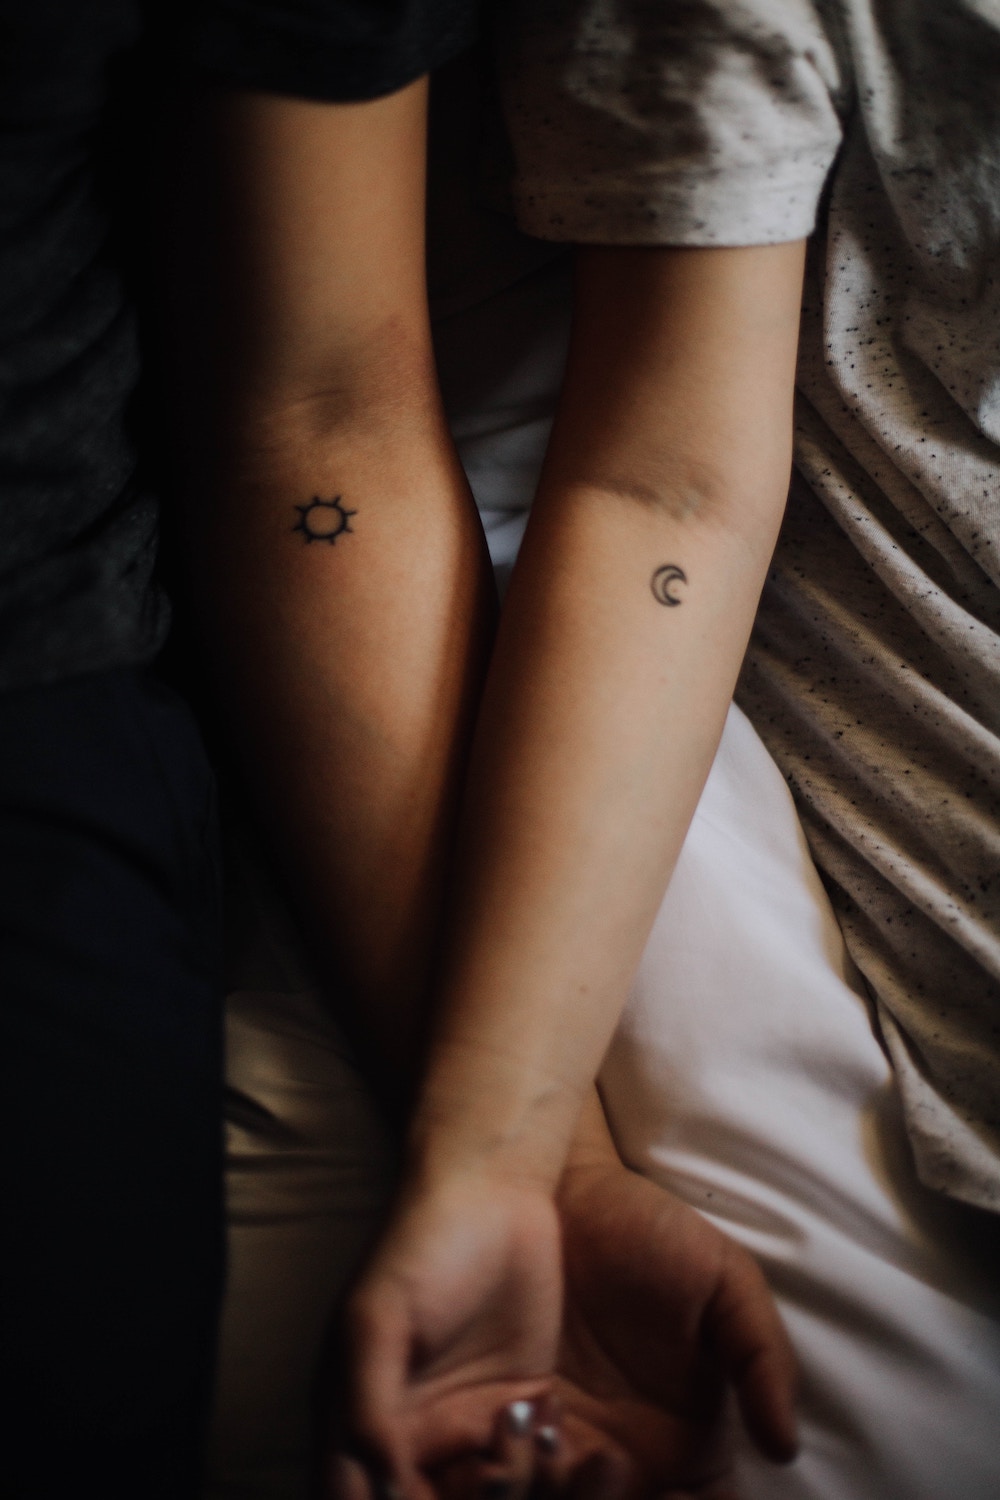 Astrology 101: What Can Your Zodiac Sign Teach You? Zodiac sign with dates; zodiac sign by month; zodiac sign personalities | Happy As Annie (Gemini, the Twins. Two Arms with Sun and Moon tattoos.)